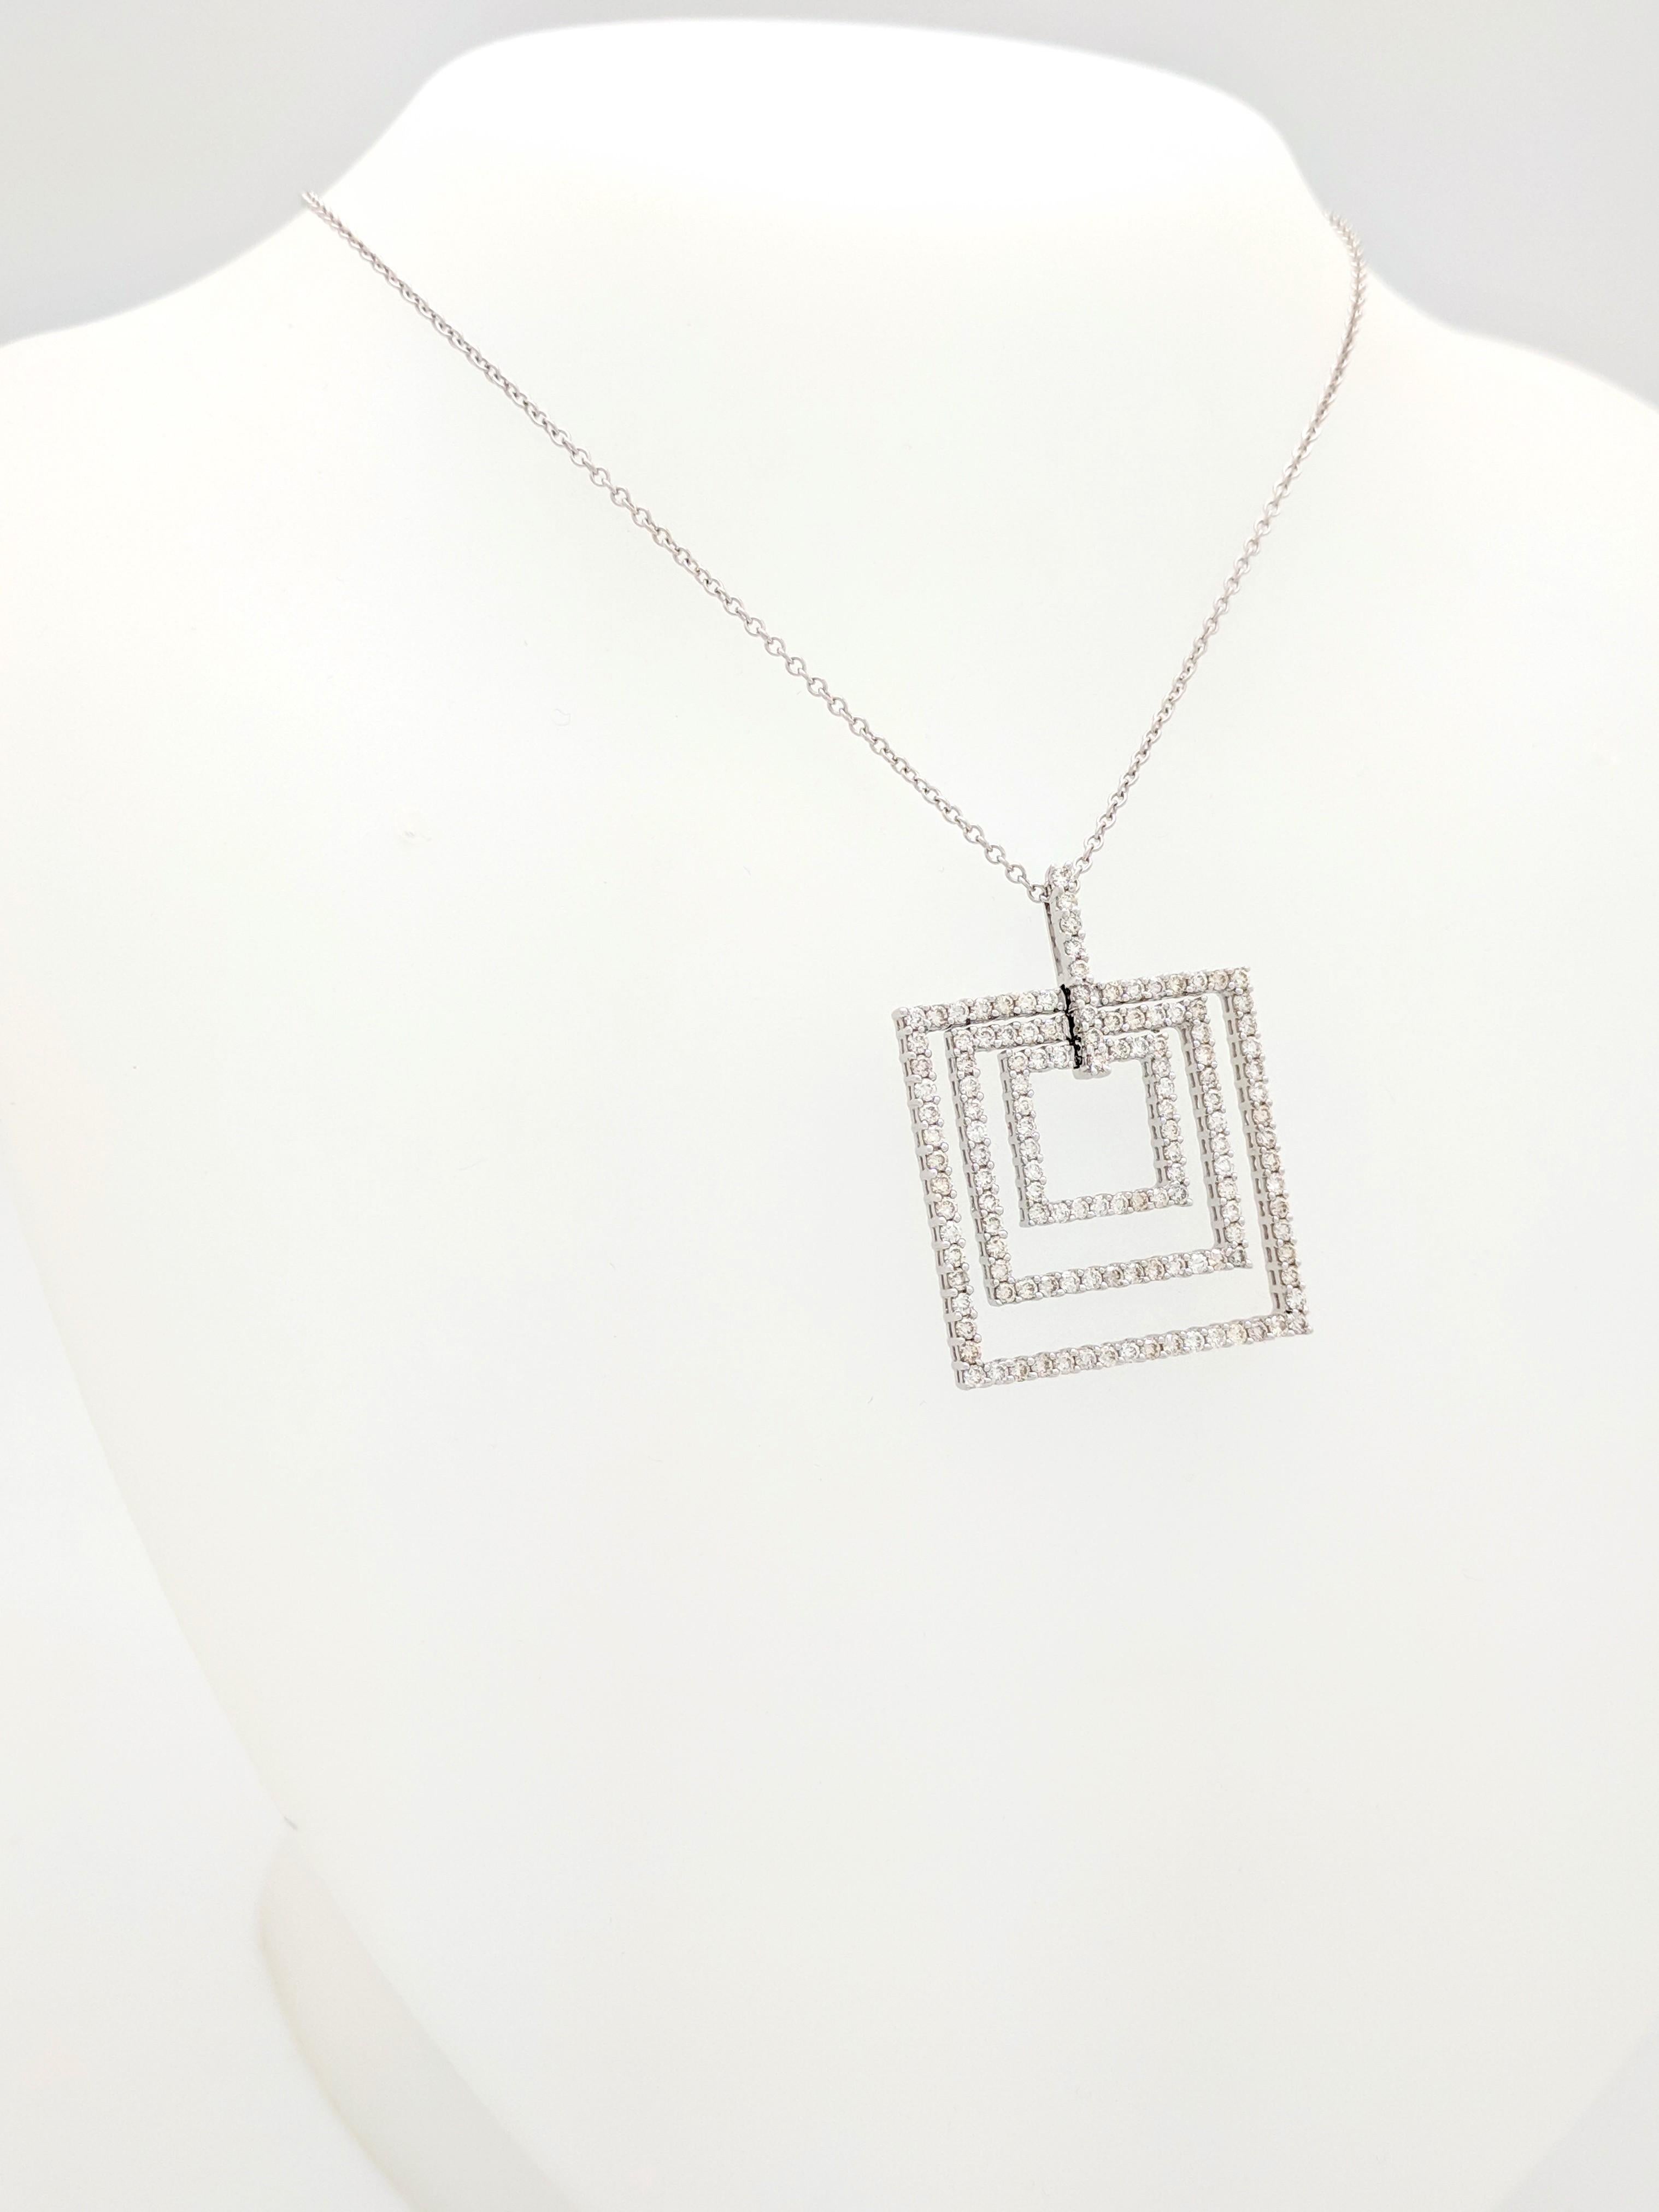 18K White Gold Diamond Square Layered Pendant Necklace

You are viewing a beautiful diamond squared layered pendant necklace. The piece is crafted from 18k white gold and weighs 10.2 gram. It features 135 round brilliant cut diamonds for an 2.43